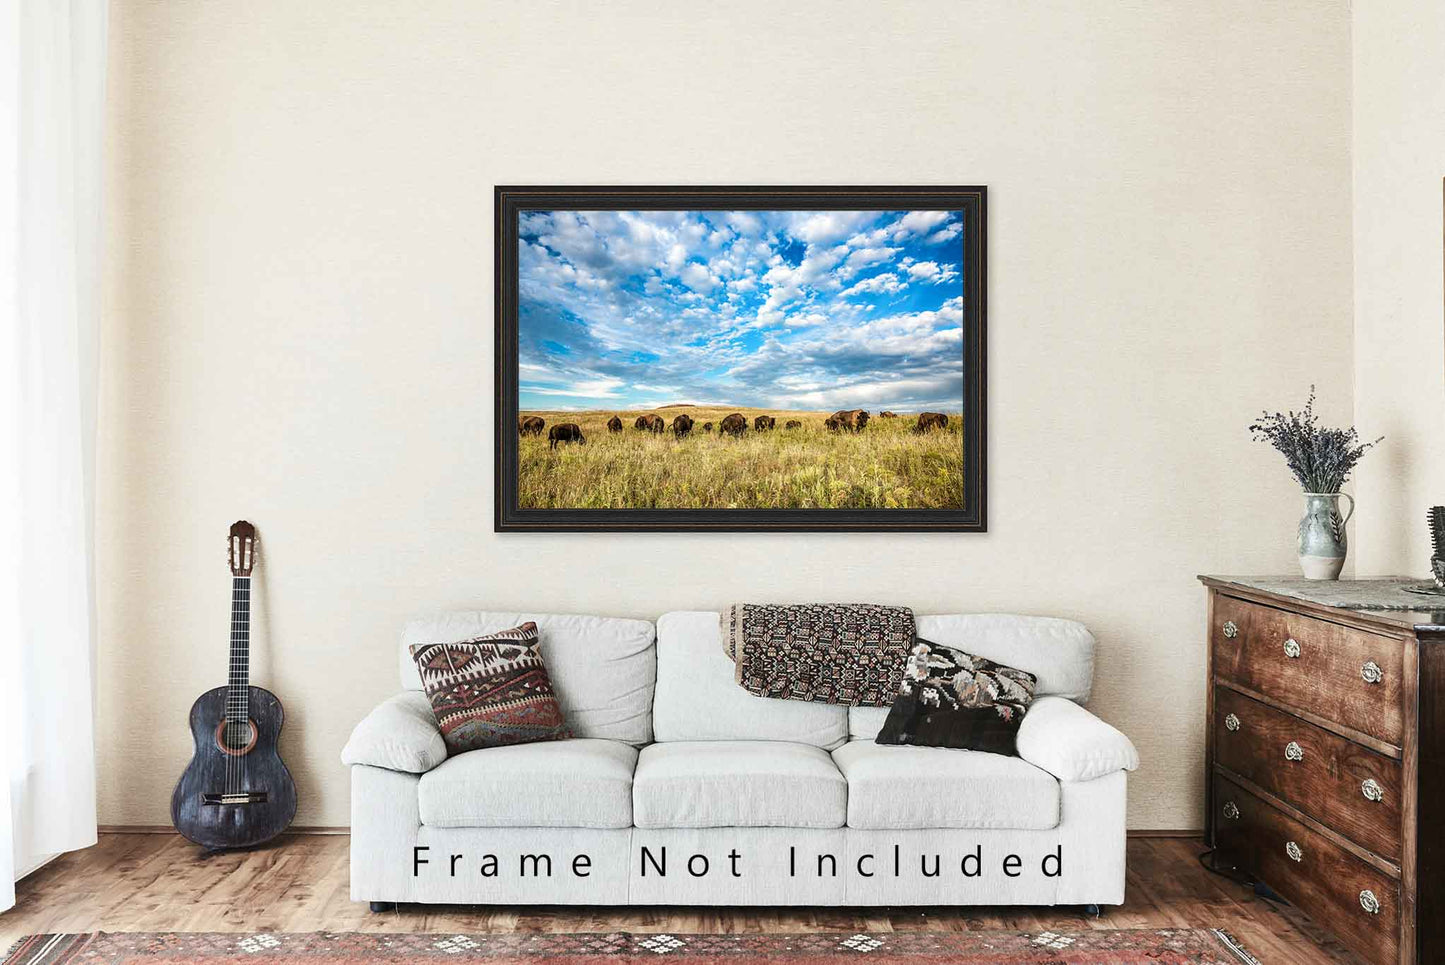 Buffalo Photography Print | Bison Herd Picture | Oklahoma Wall Art | Great Plains Photo | Western Decor | Not Framed